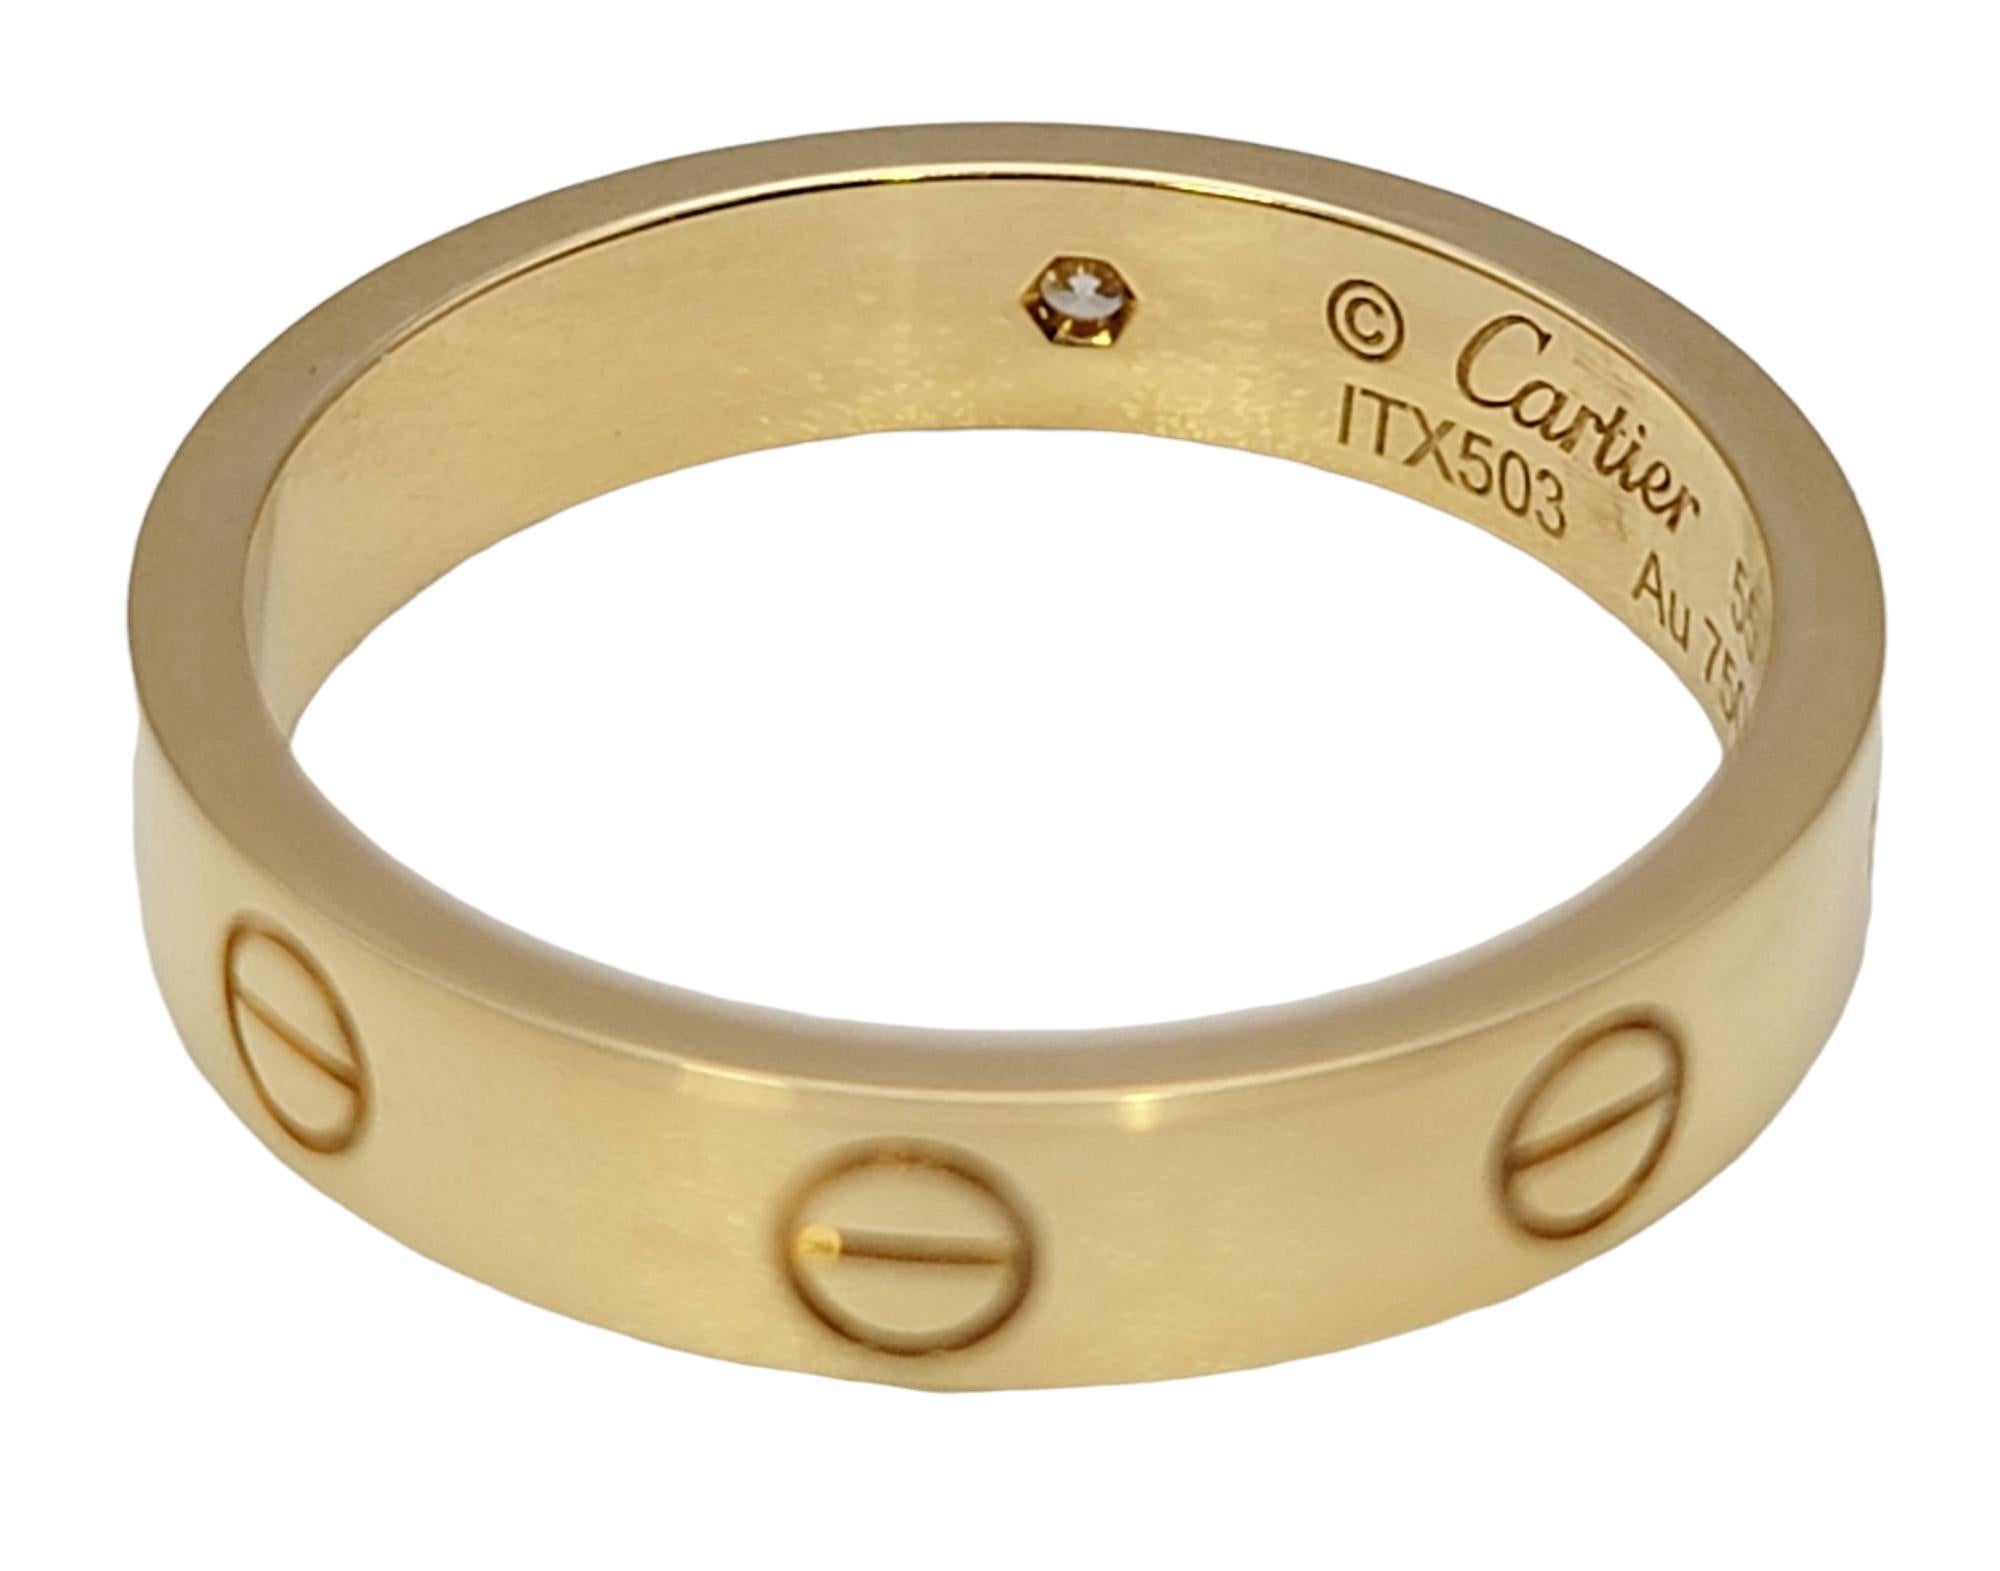 Women's or Men's Cartier Love Collection 18 Karat Yellow Gold Wedding Band Ring with Diamond, Box